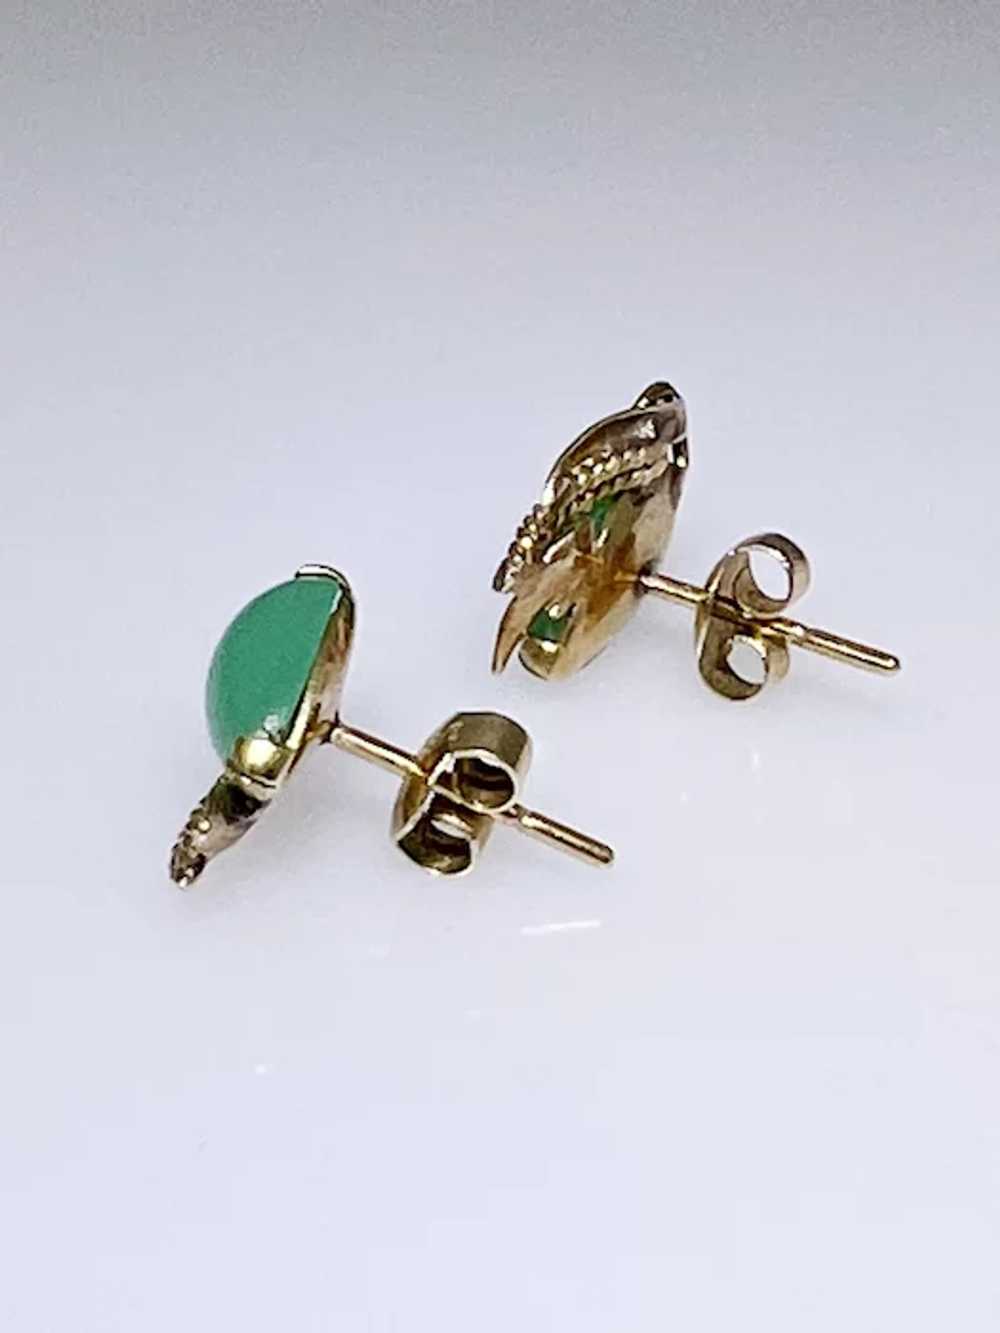 Chrysoprase 14kt gold earrings,  top quality - image 6